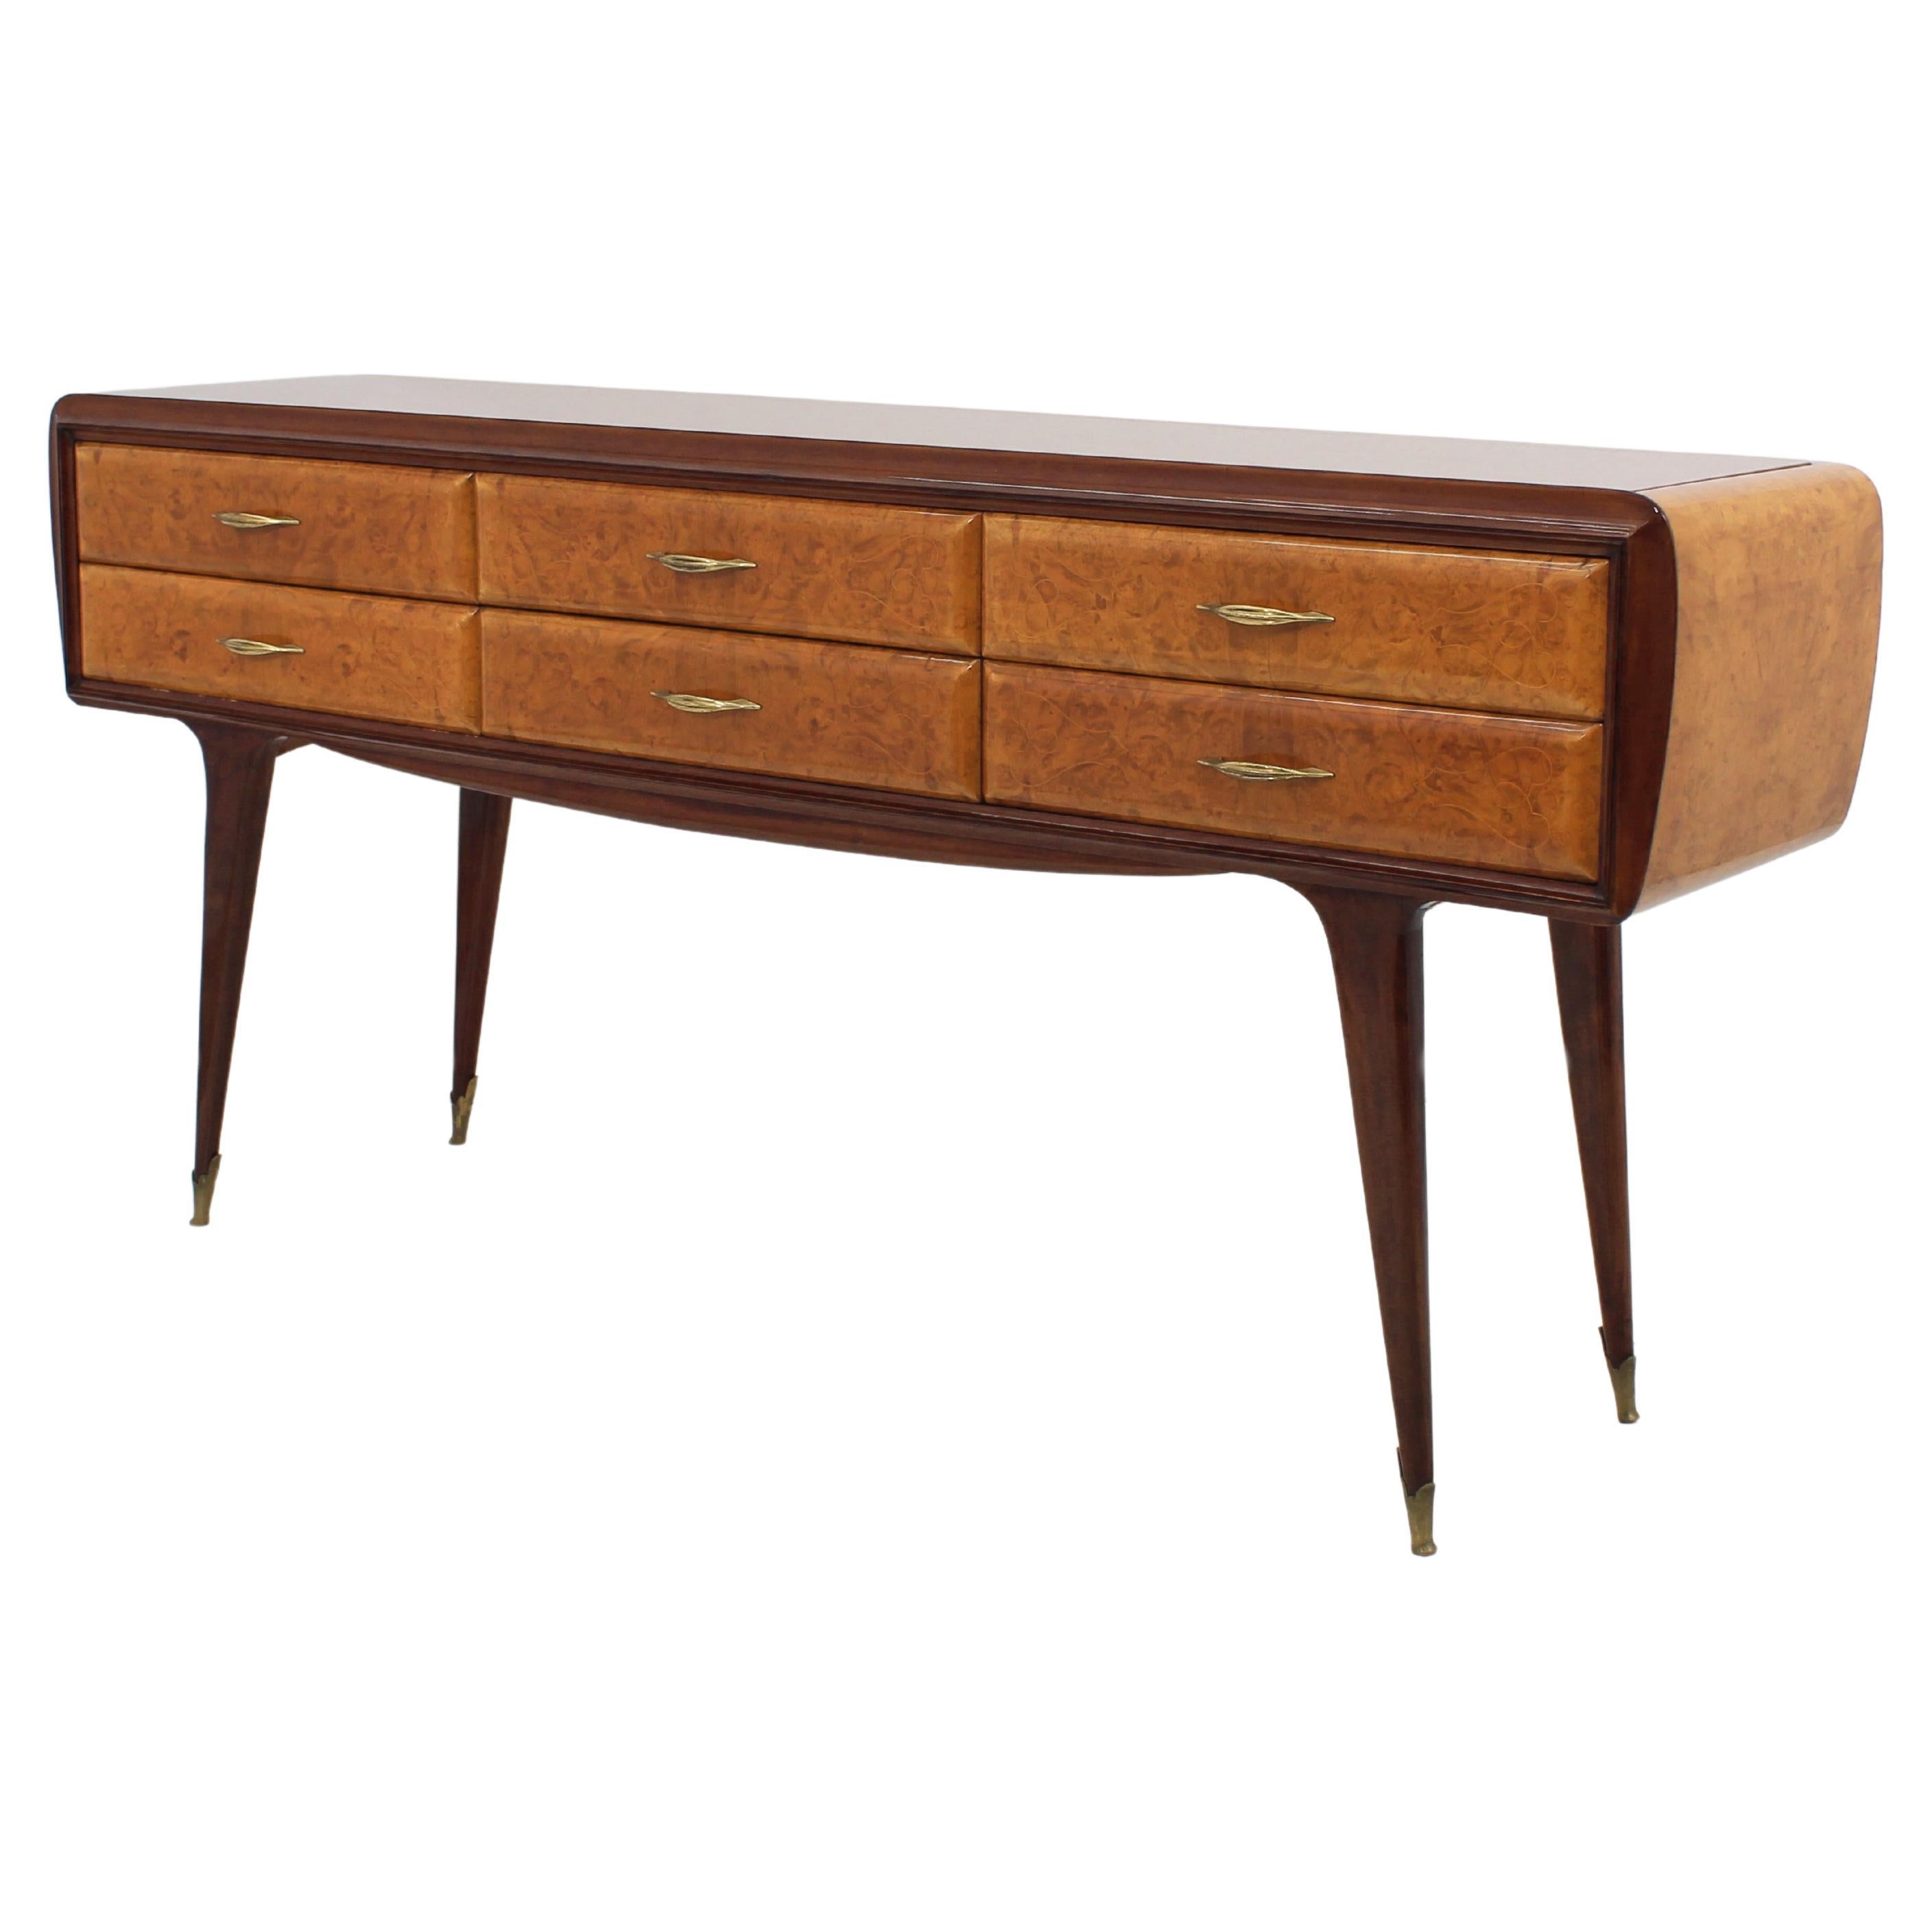 Restored wooden sideboard with spiked feet, six drawers, with briar coverings and glass top. Captivating curved profiles, abstract linear decorations on the burl of the rounded drawers and beautiful champaigne-colored top with relief motifs, with